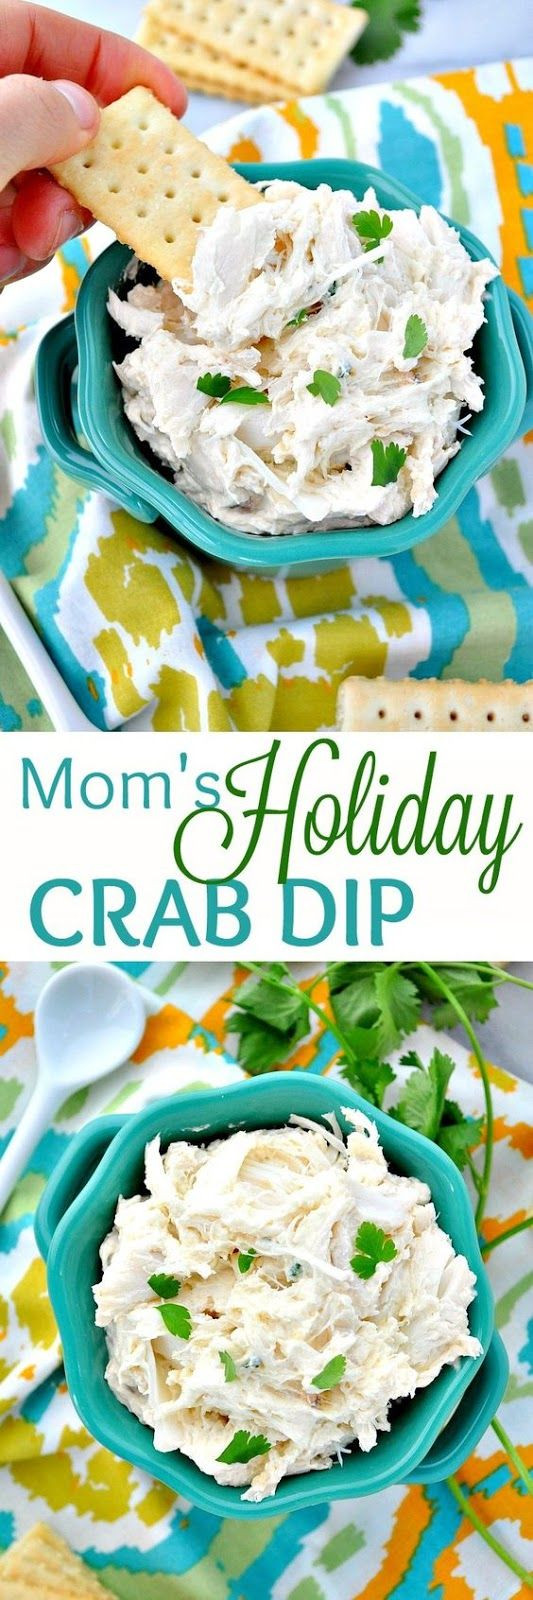 Cold Christmas Appetizers
 Mom’s Holiday Crab Dip Recipe Dips